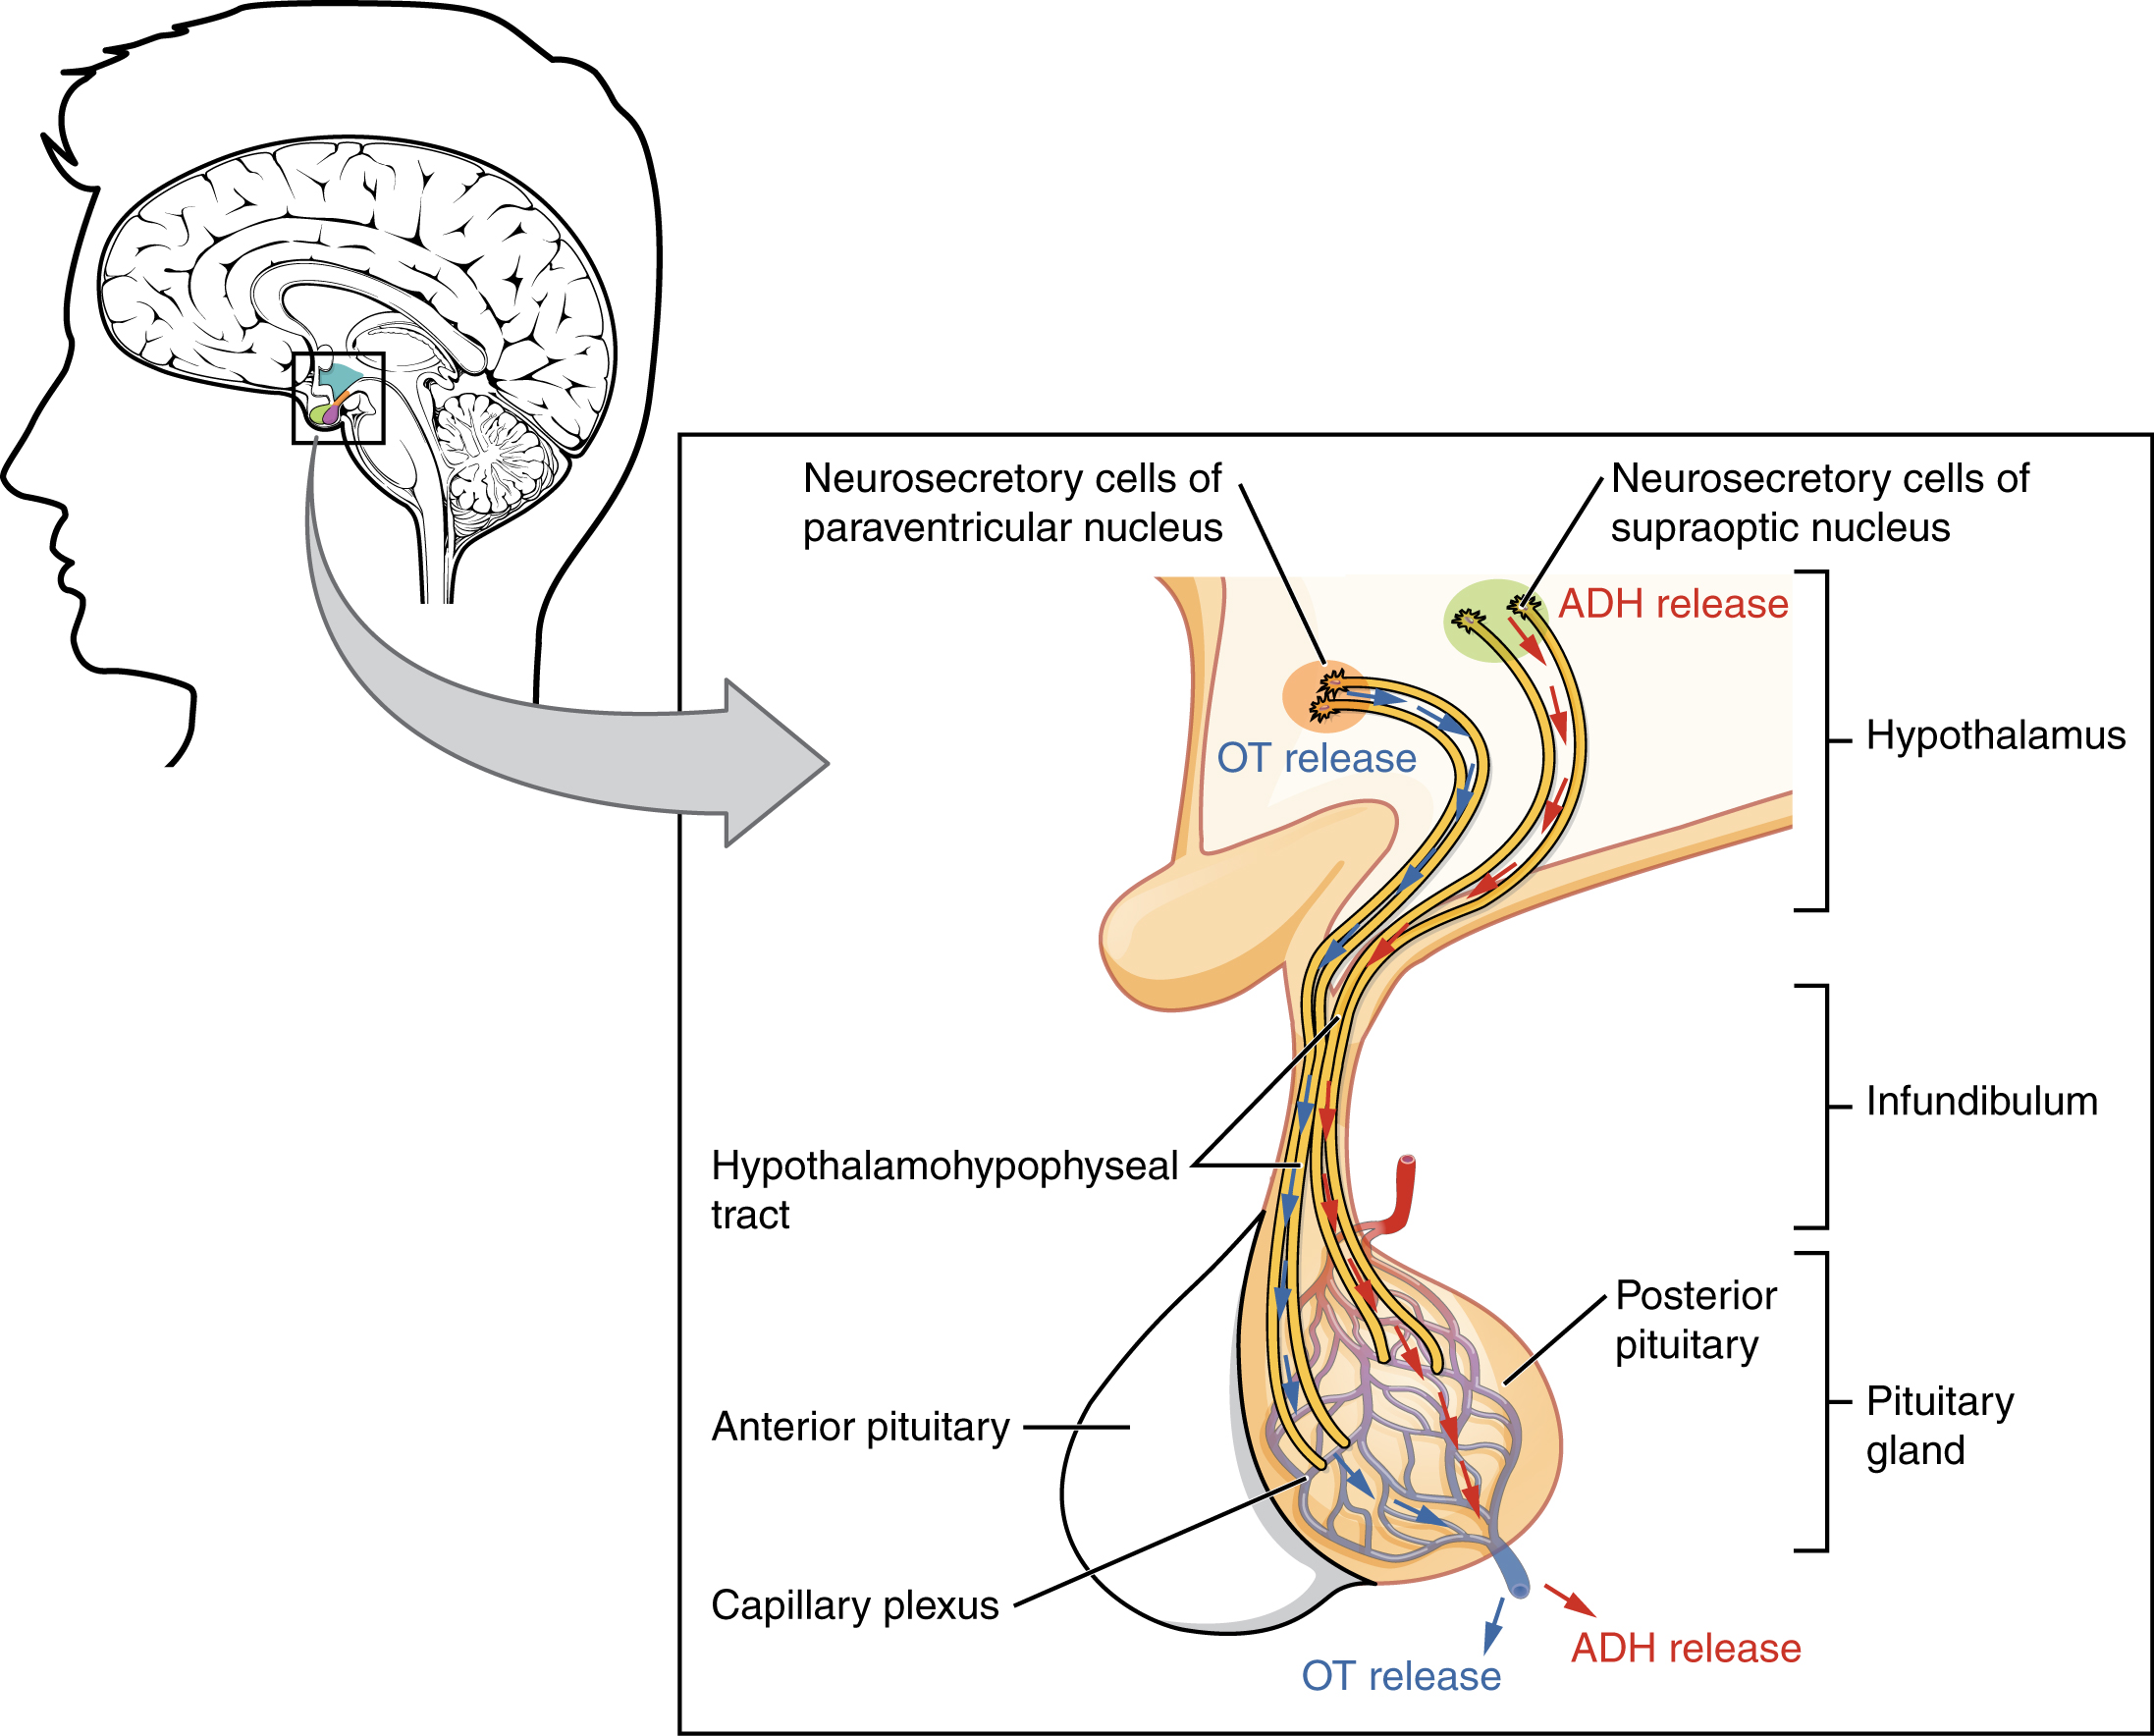 1807_The_Posterior_Pituitary_Complex1.jpg